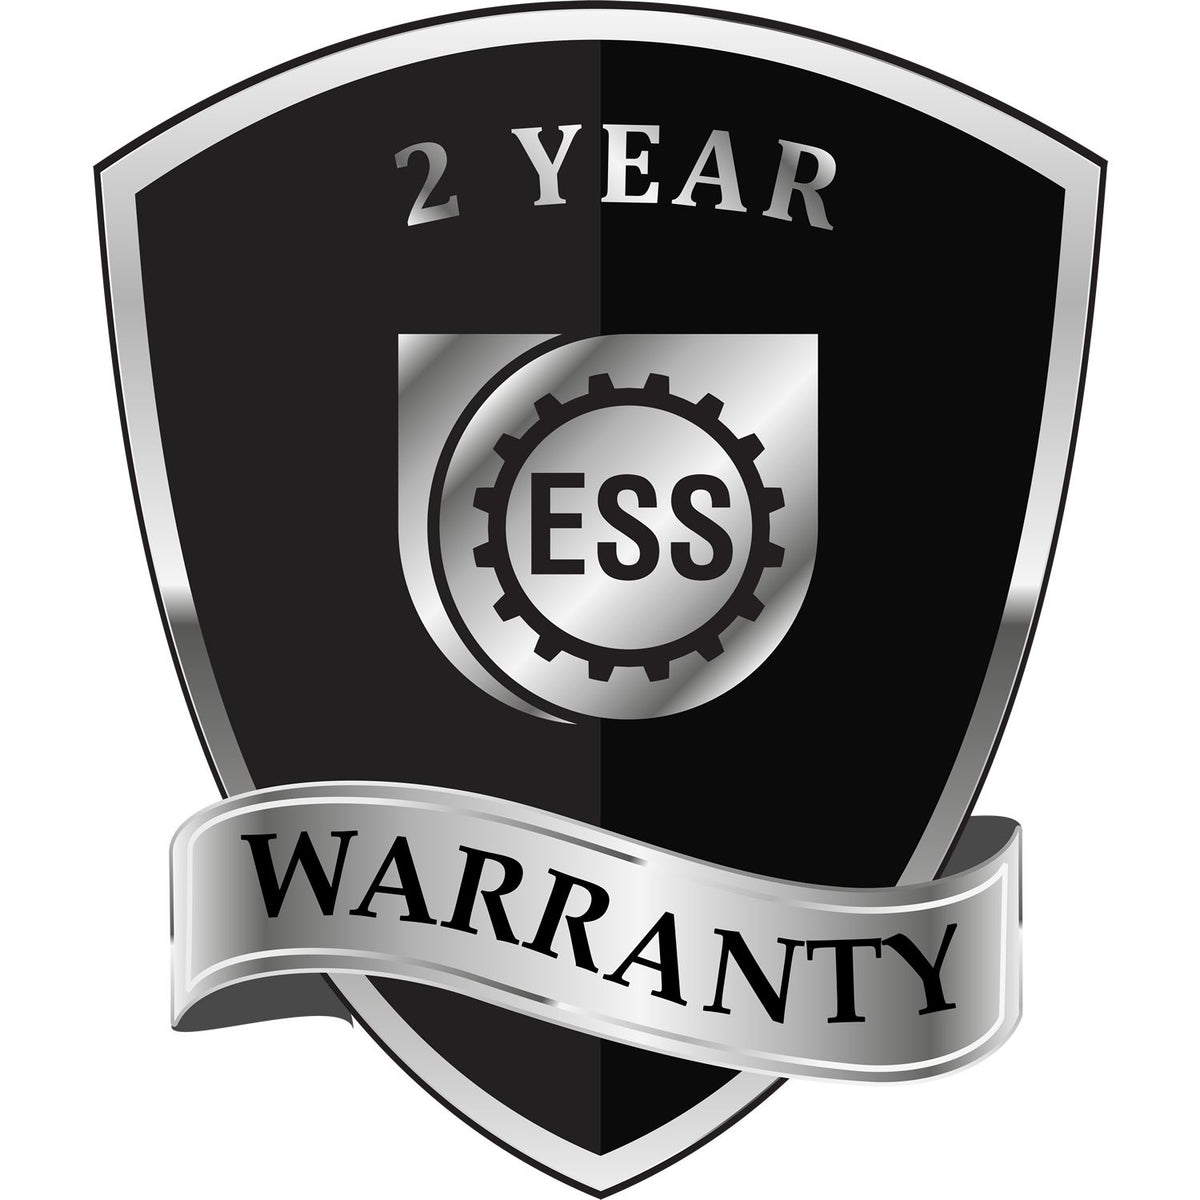 A badge or emblem showing a warranty icon for the State of Alabama Architectural Seal Embosser